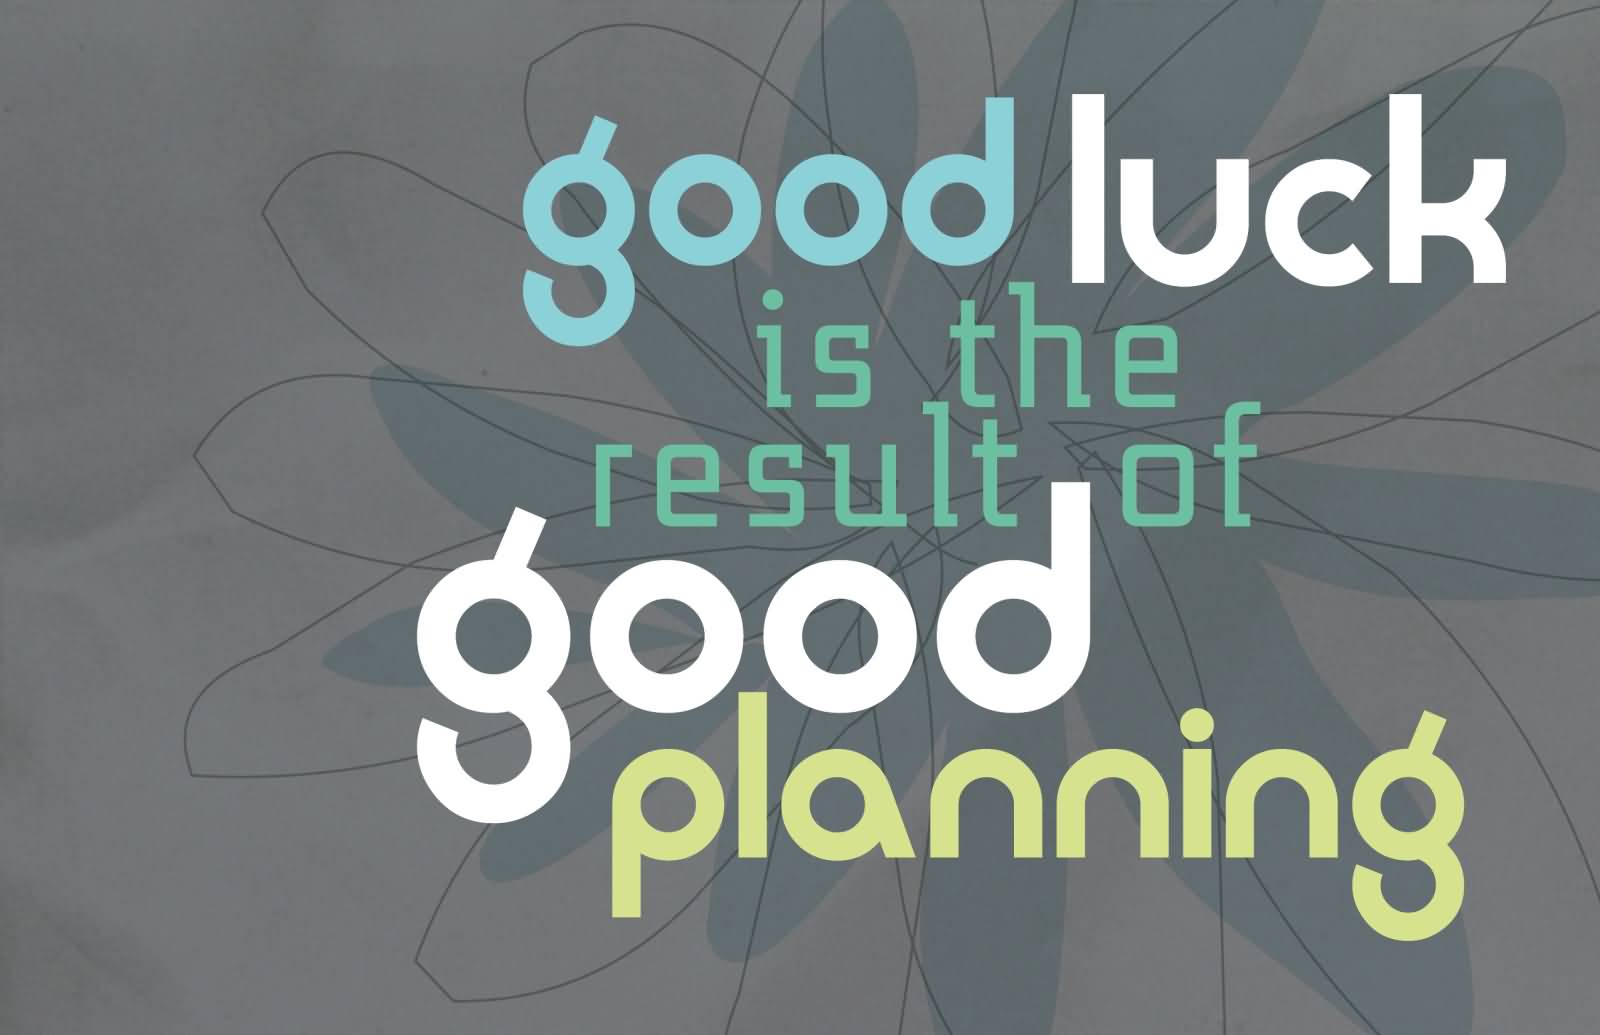 Good luck is the result of good planning